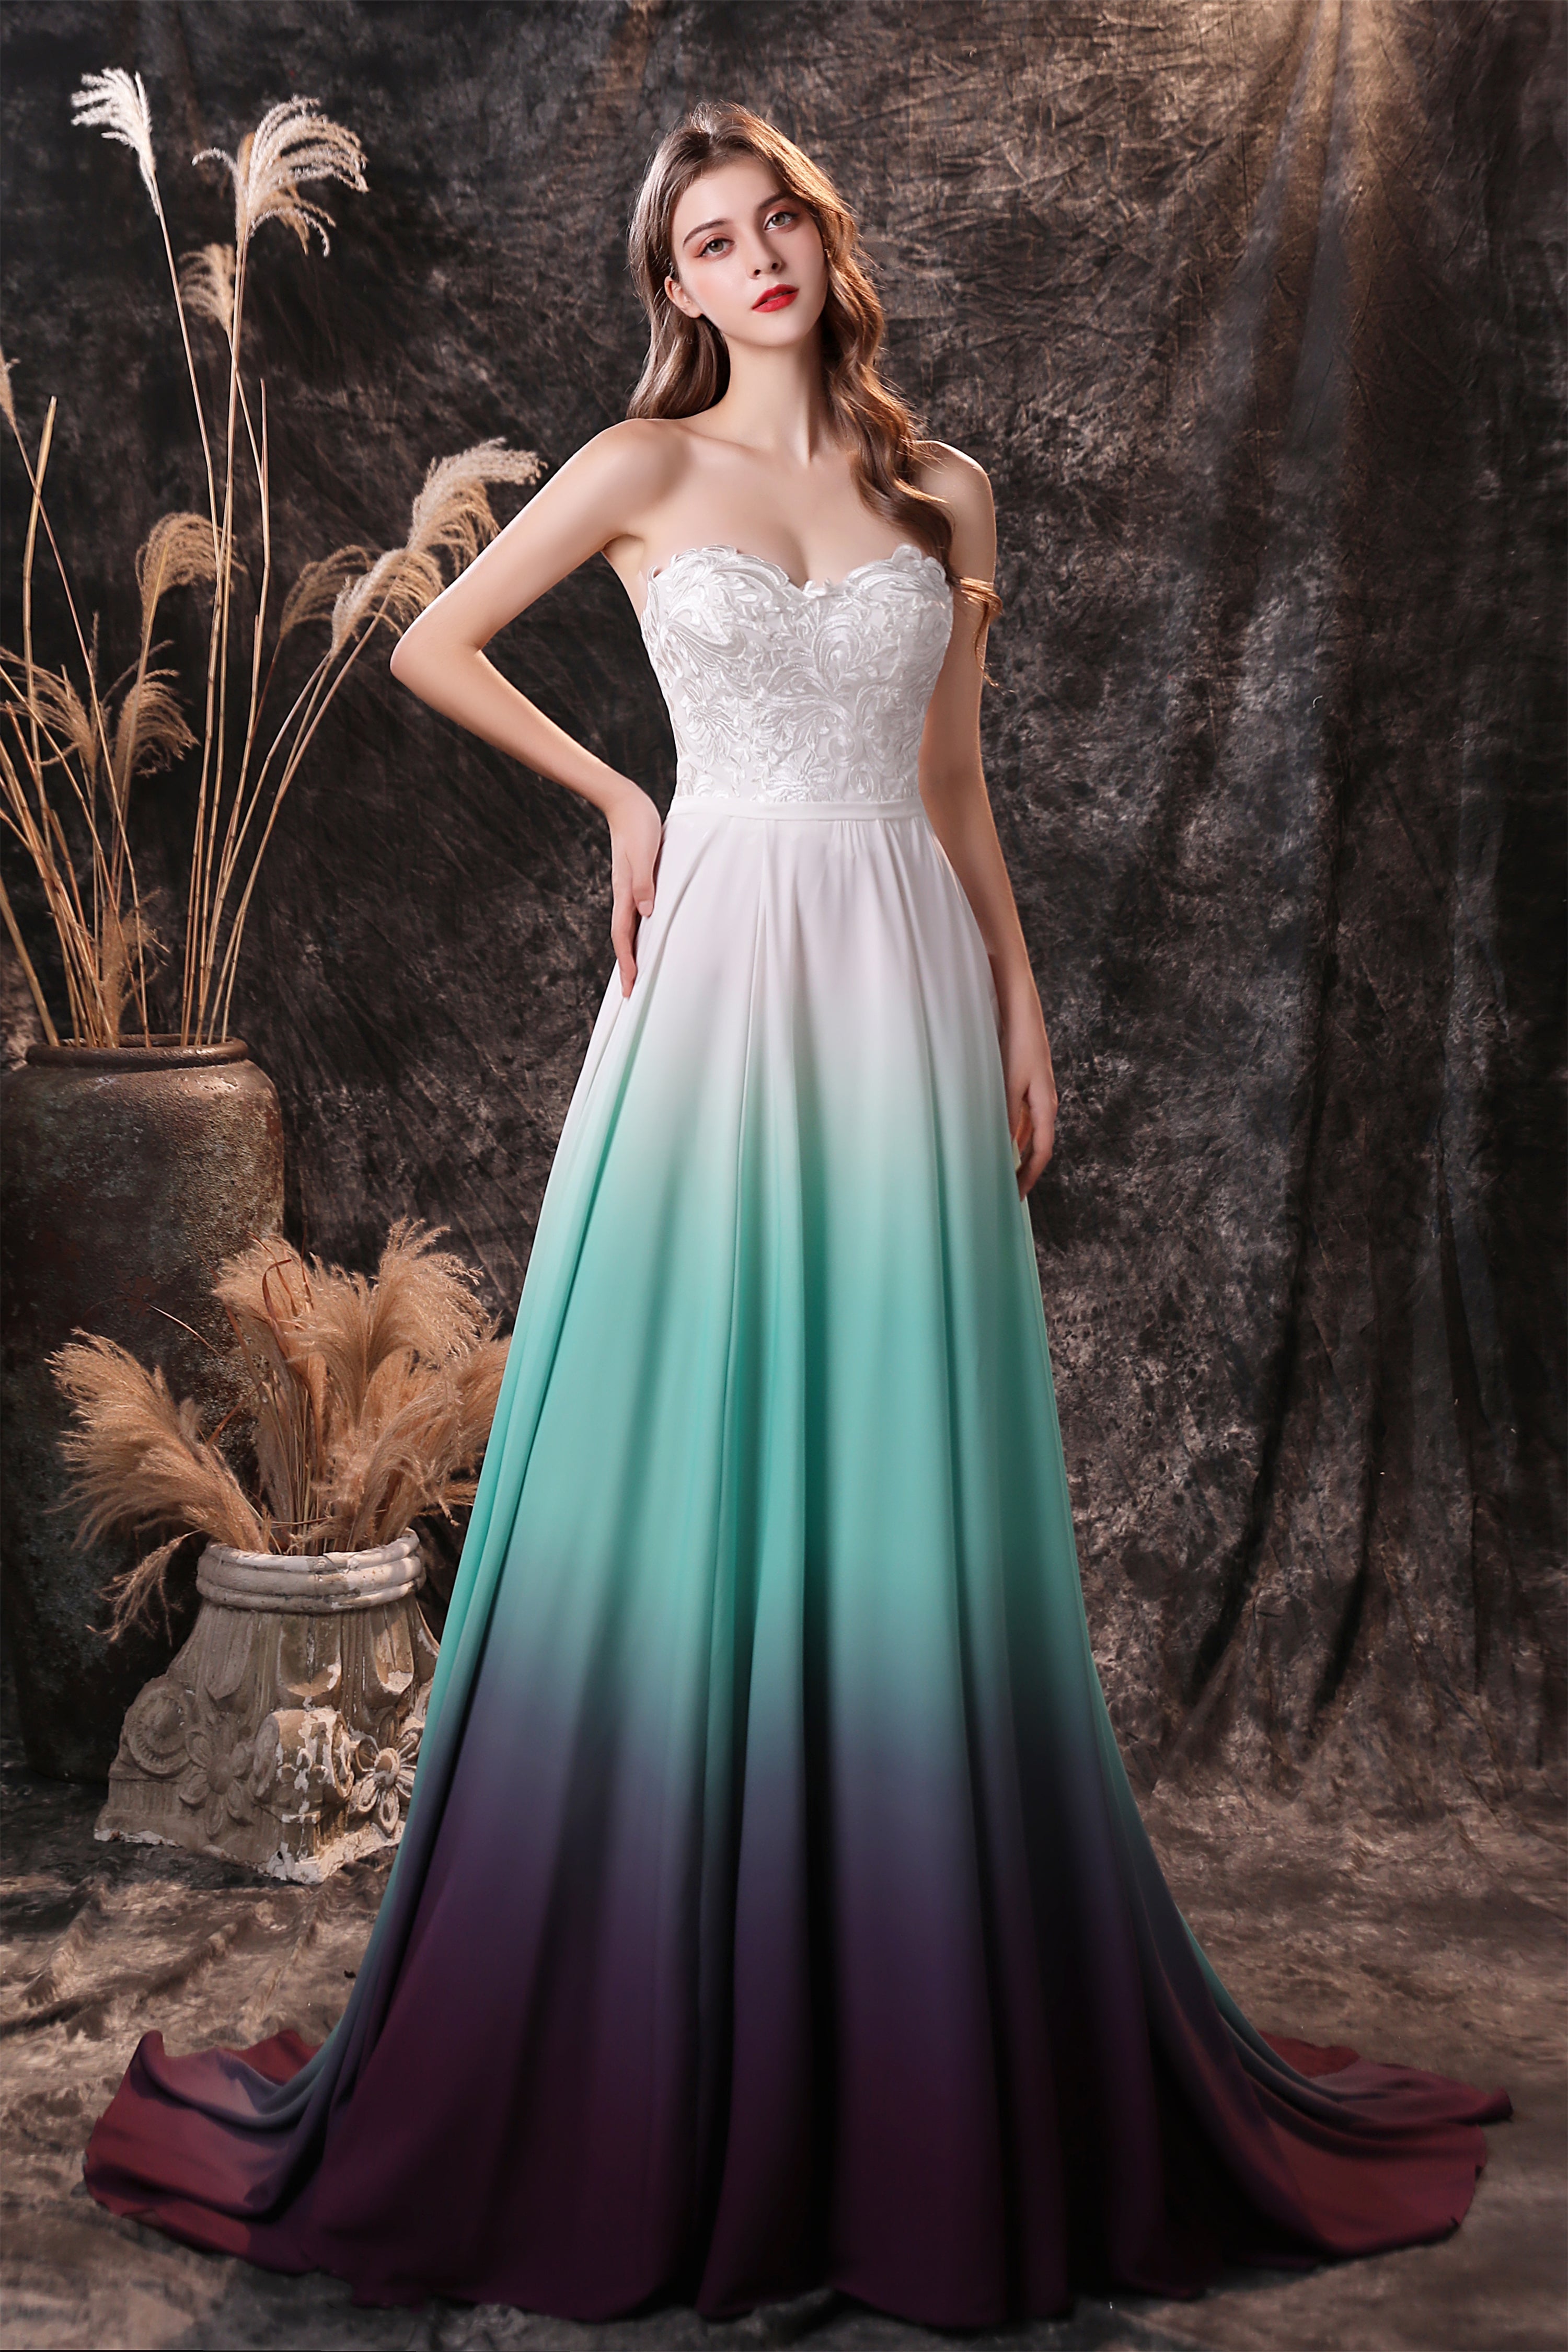 A Line Strapless Sleeveless Appliques Ombre Silk Like Satin Sweep Train Corset Prom Dresses outfit, Bridesmaid Dress Convertible